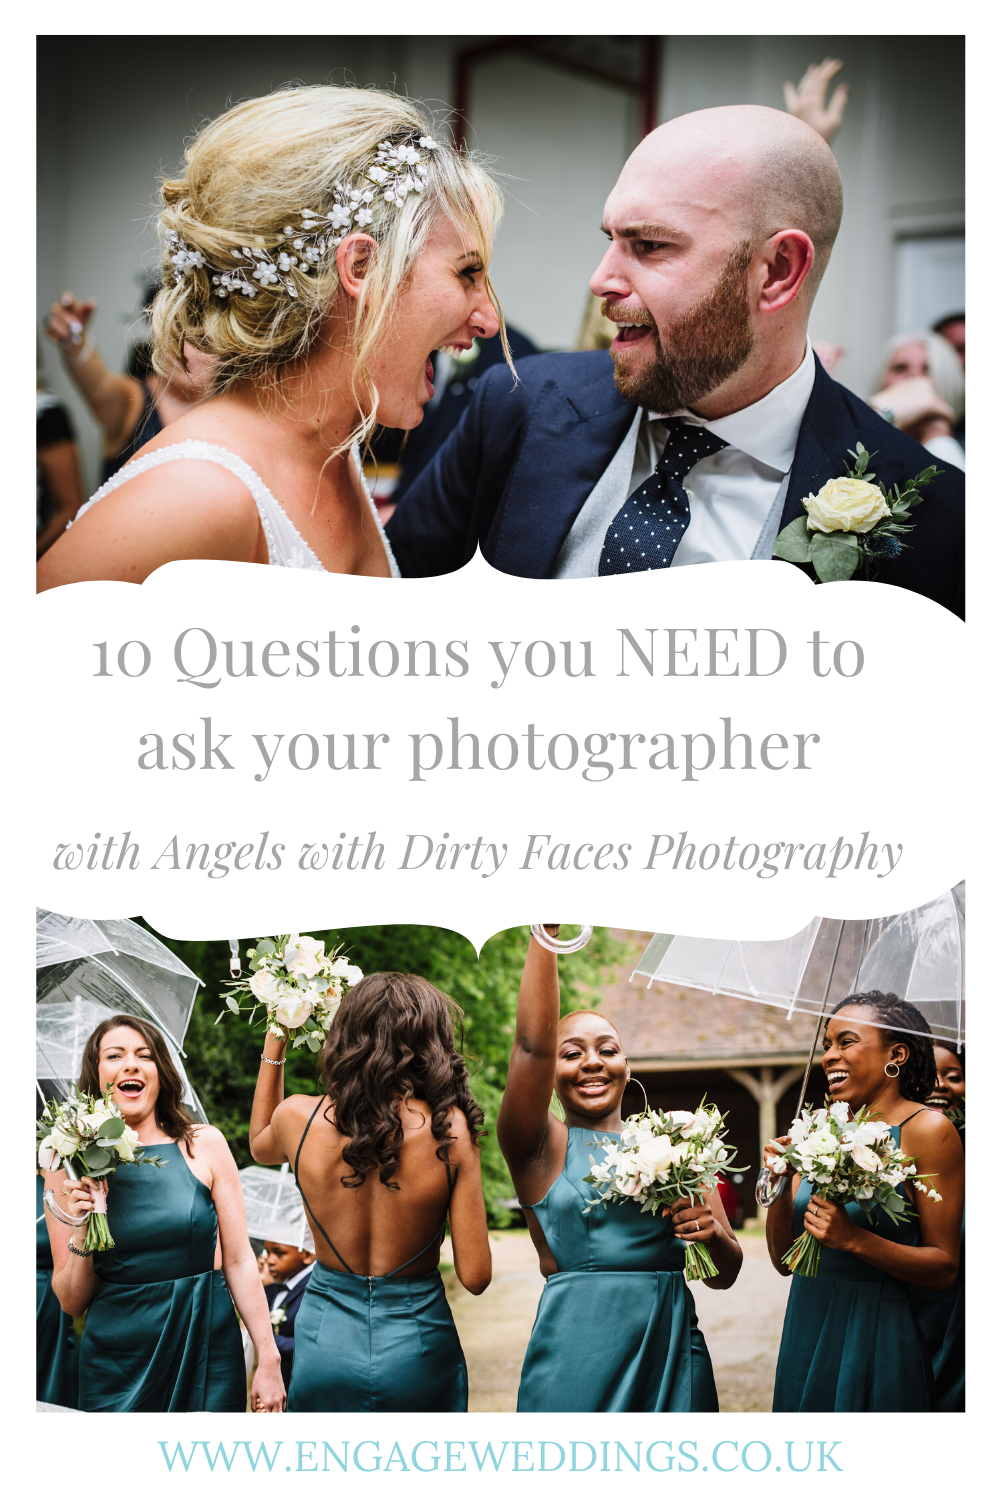 10 Questions you NEED to ask your photographer.png